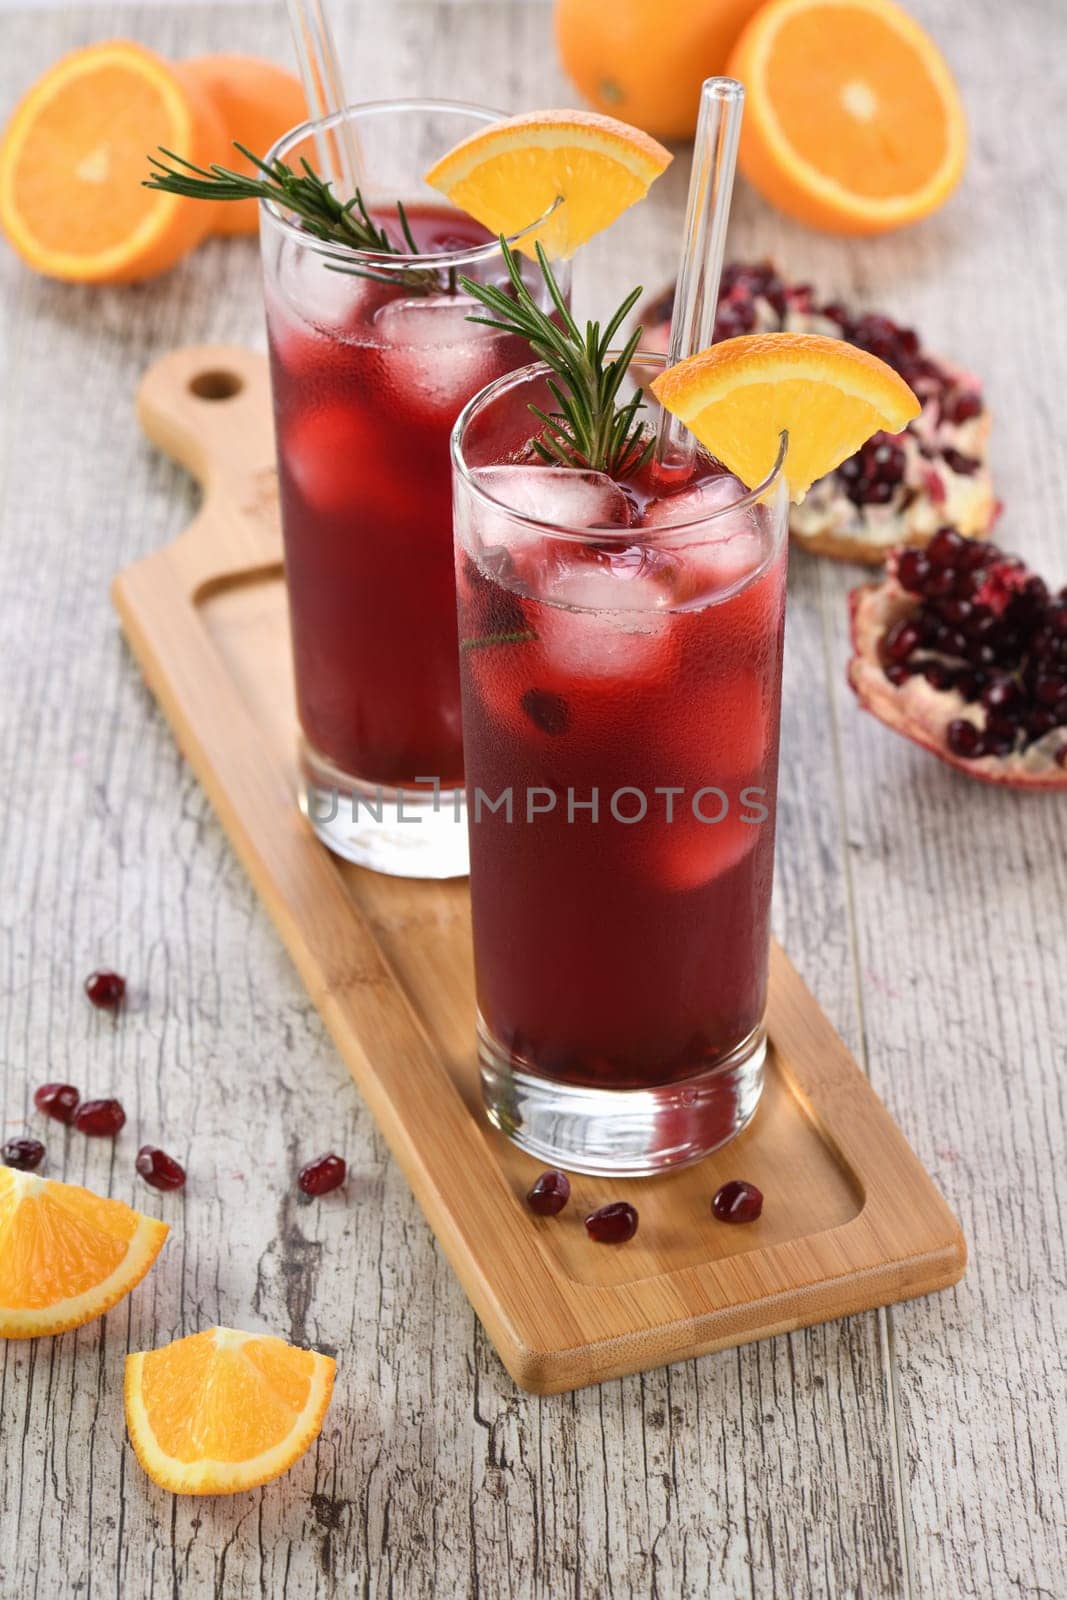 Pomegranate orange punch by Apolonia